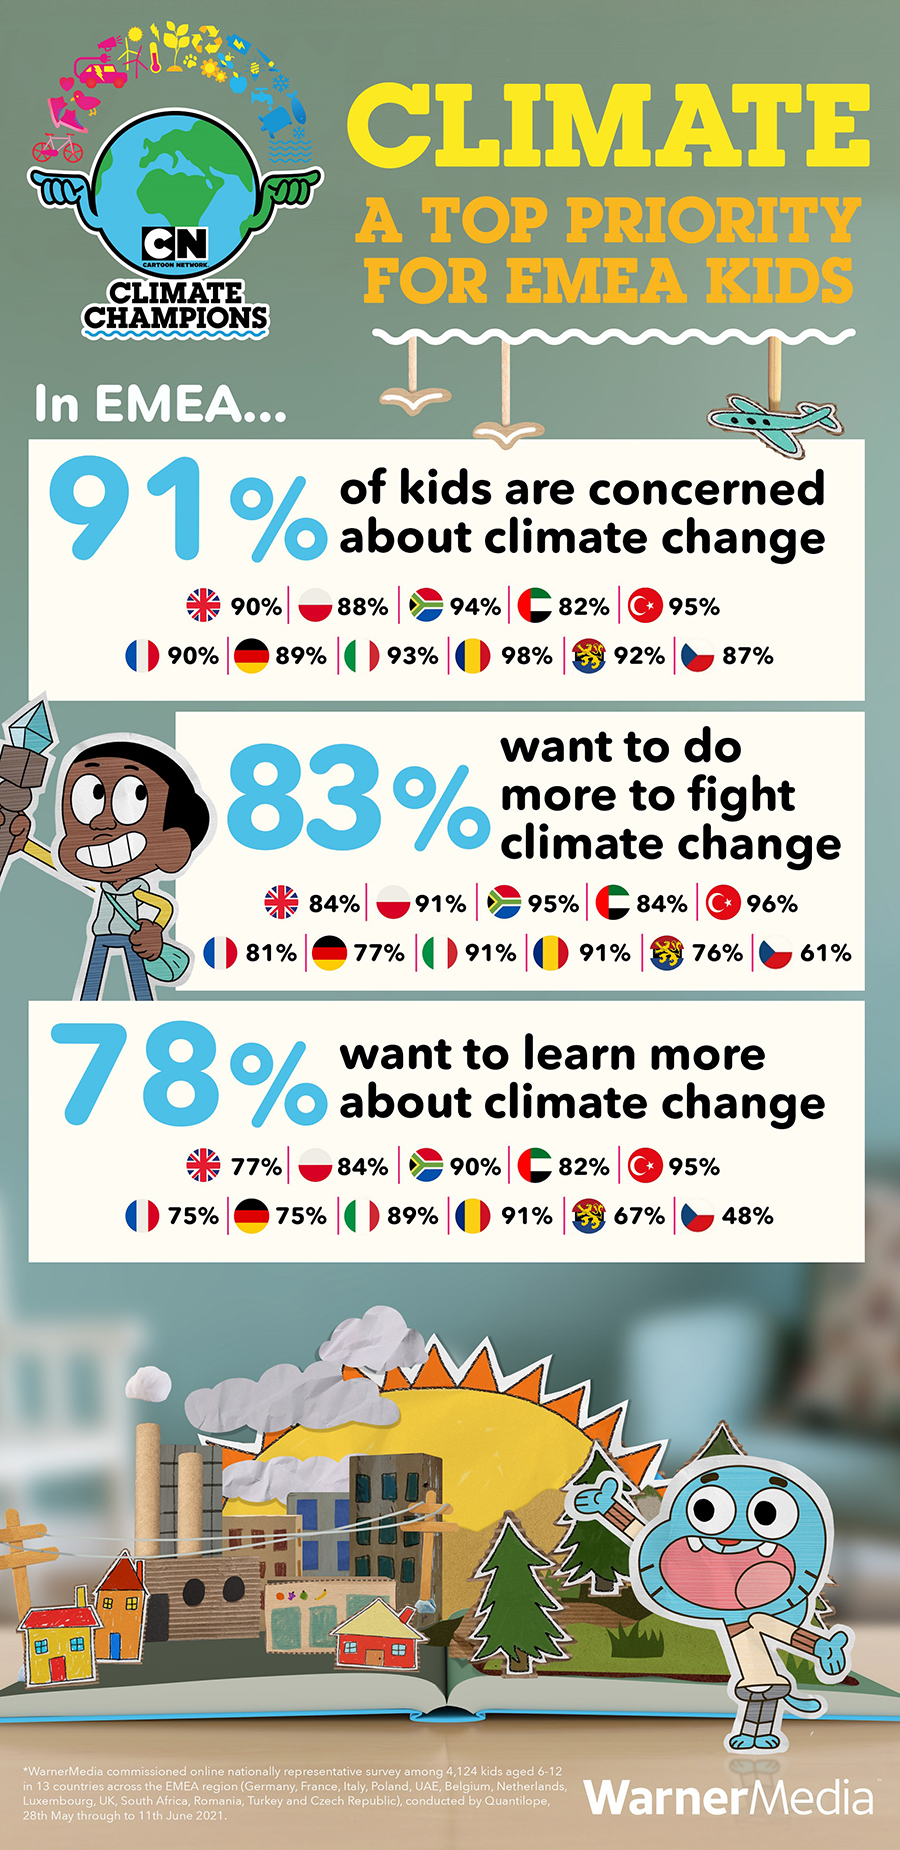 Image for Study For Cartoon Network Shows Climate Change Is A Key Concern For Kids Across EMEA